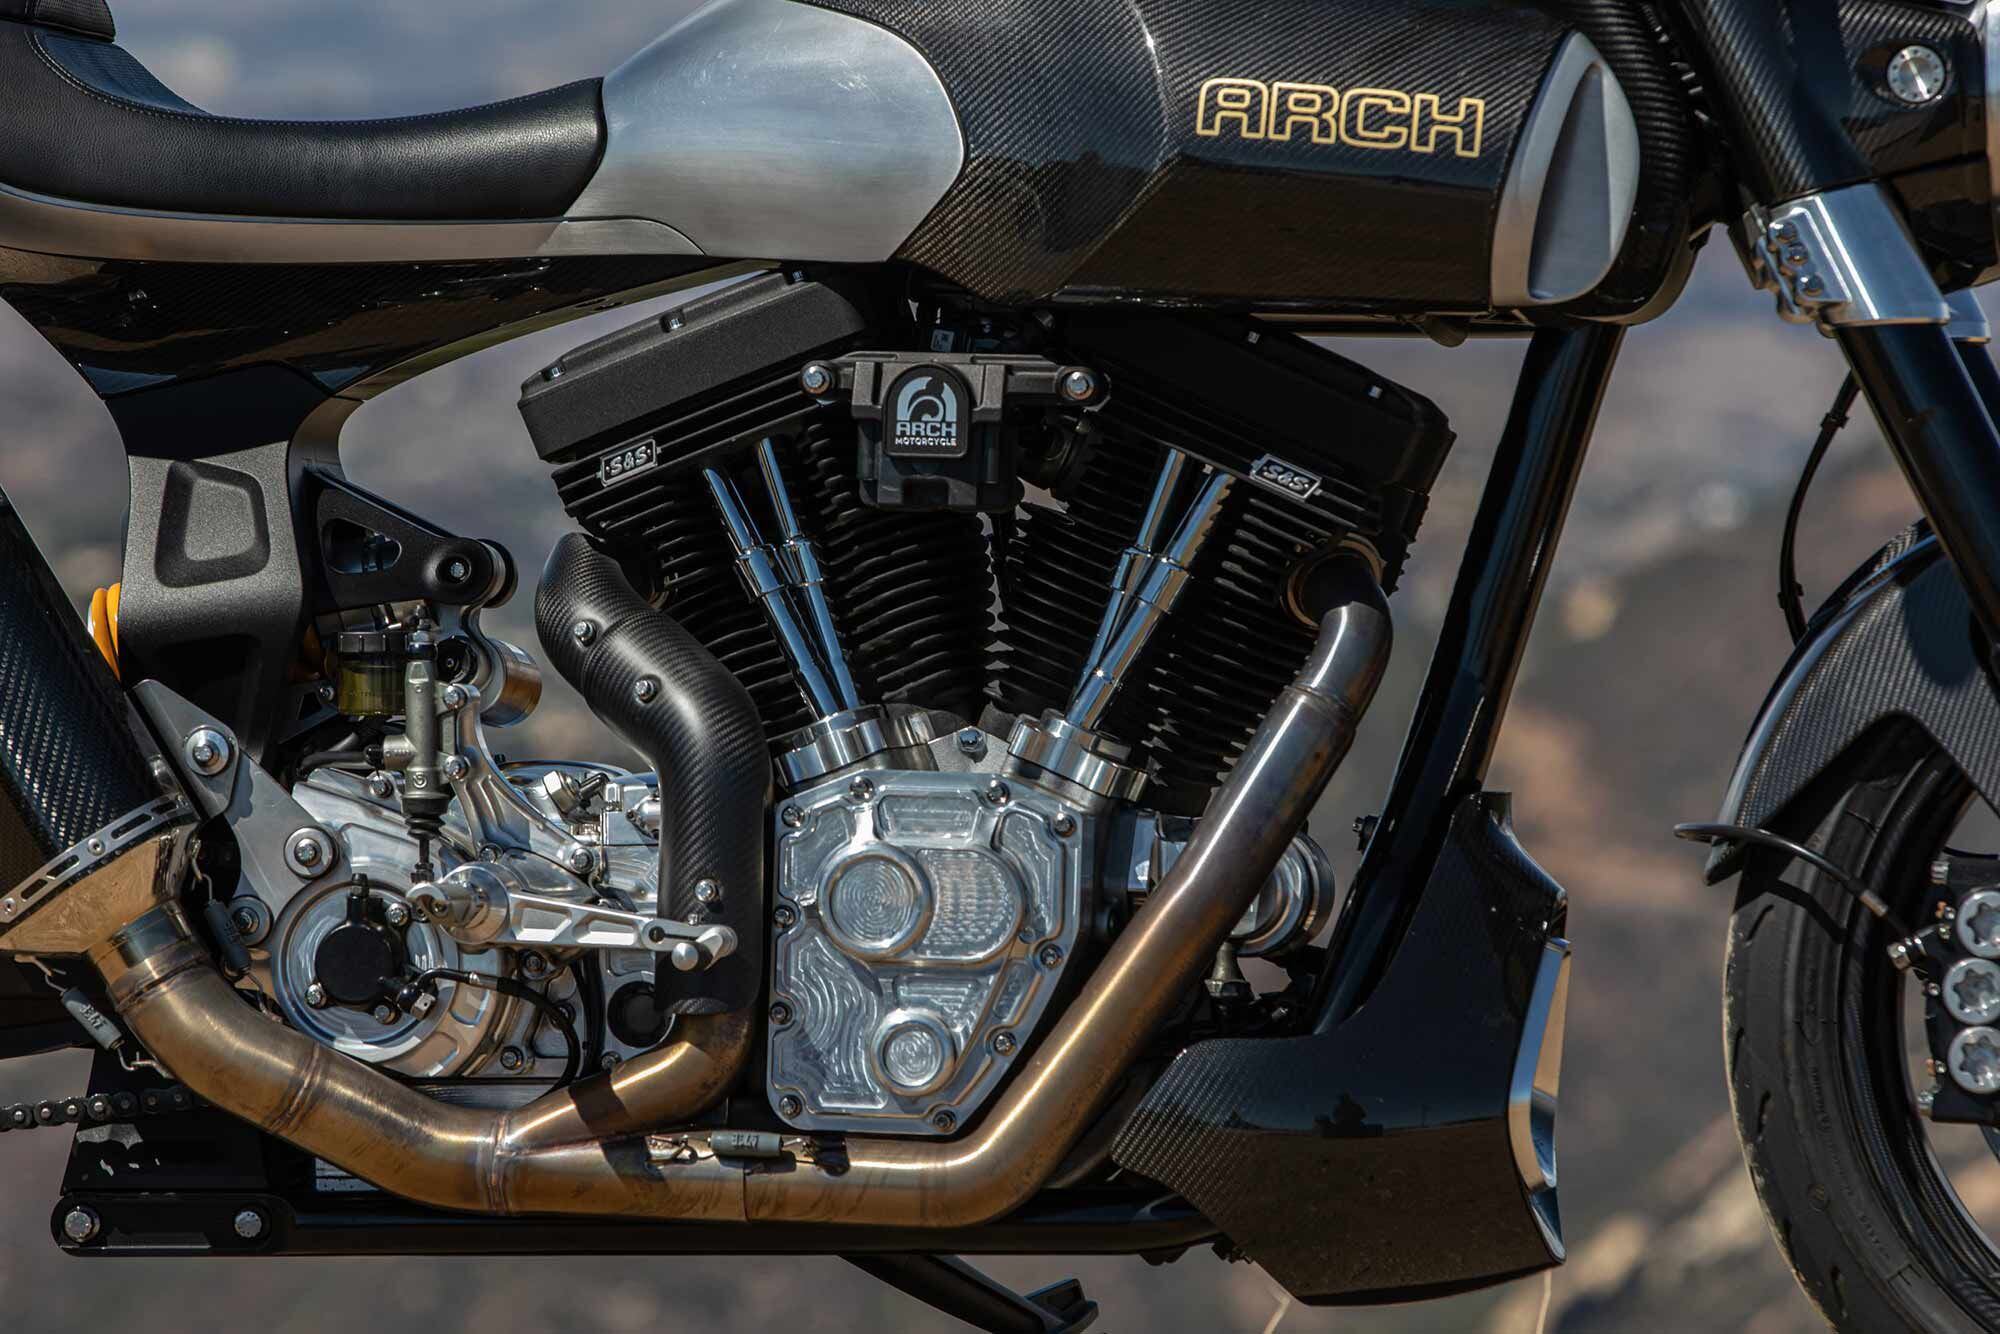 The 1s carries the Arch-designed 2,032cc S&S engine, unlike the KRGT-1 spec as far as we can gather.